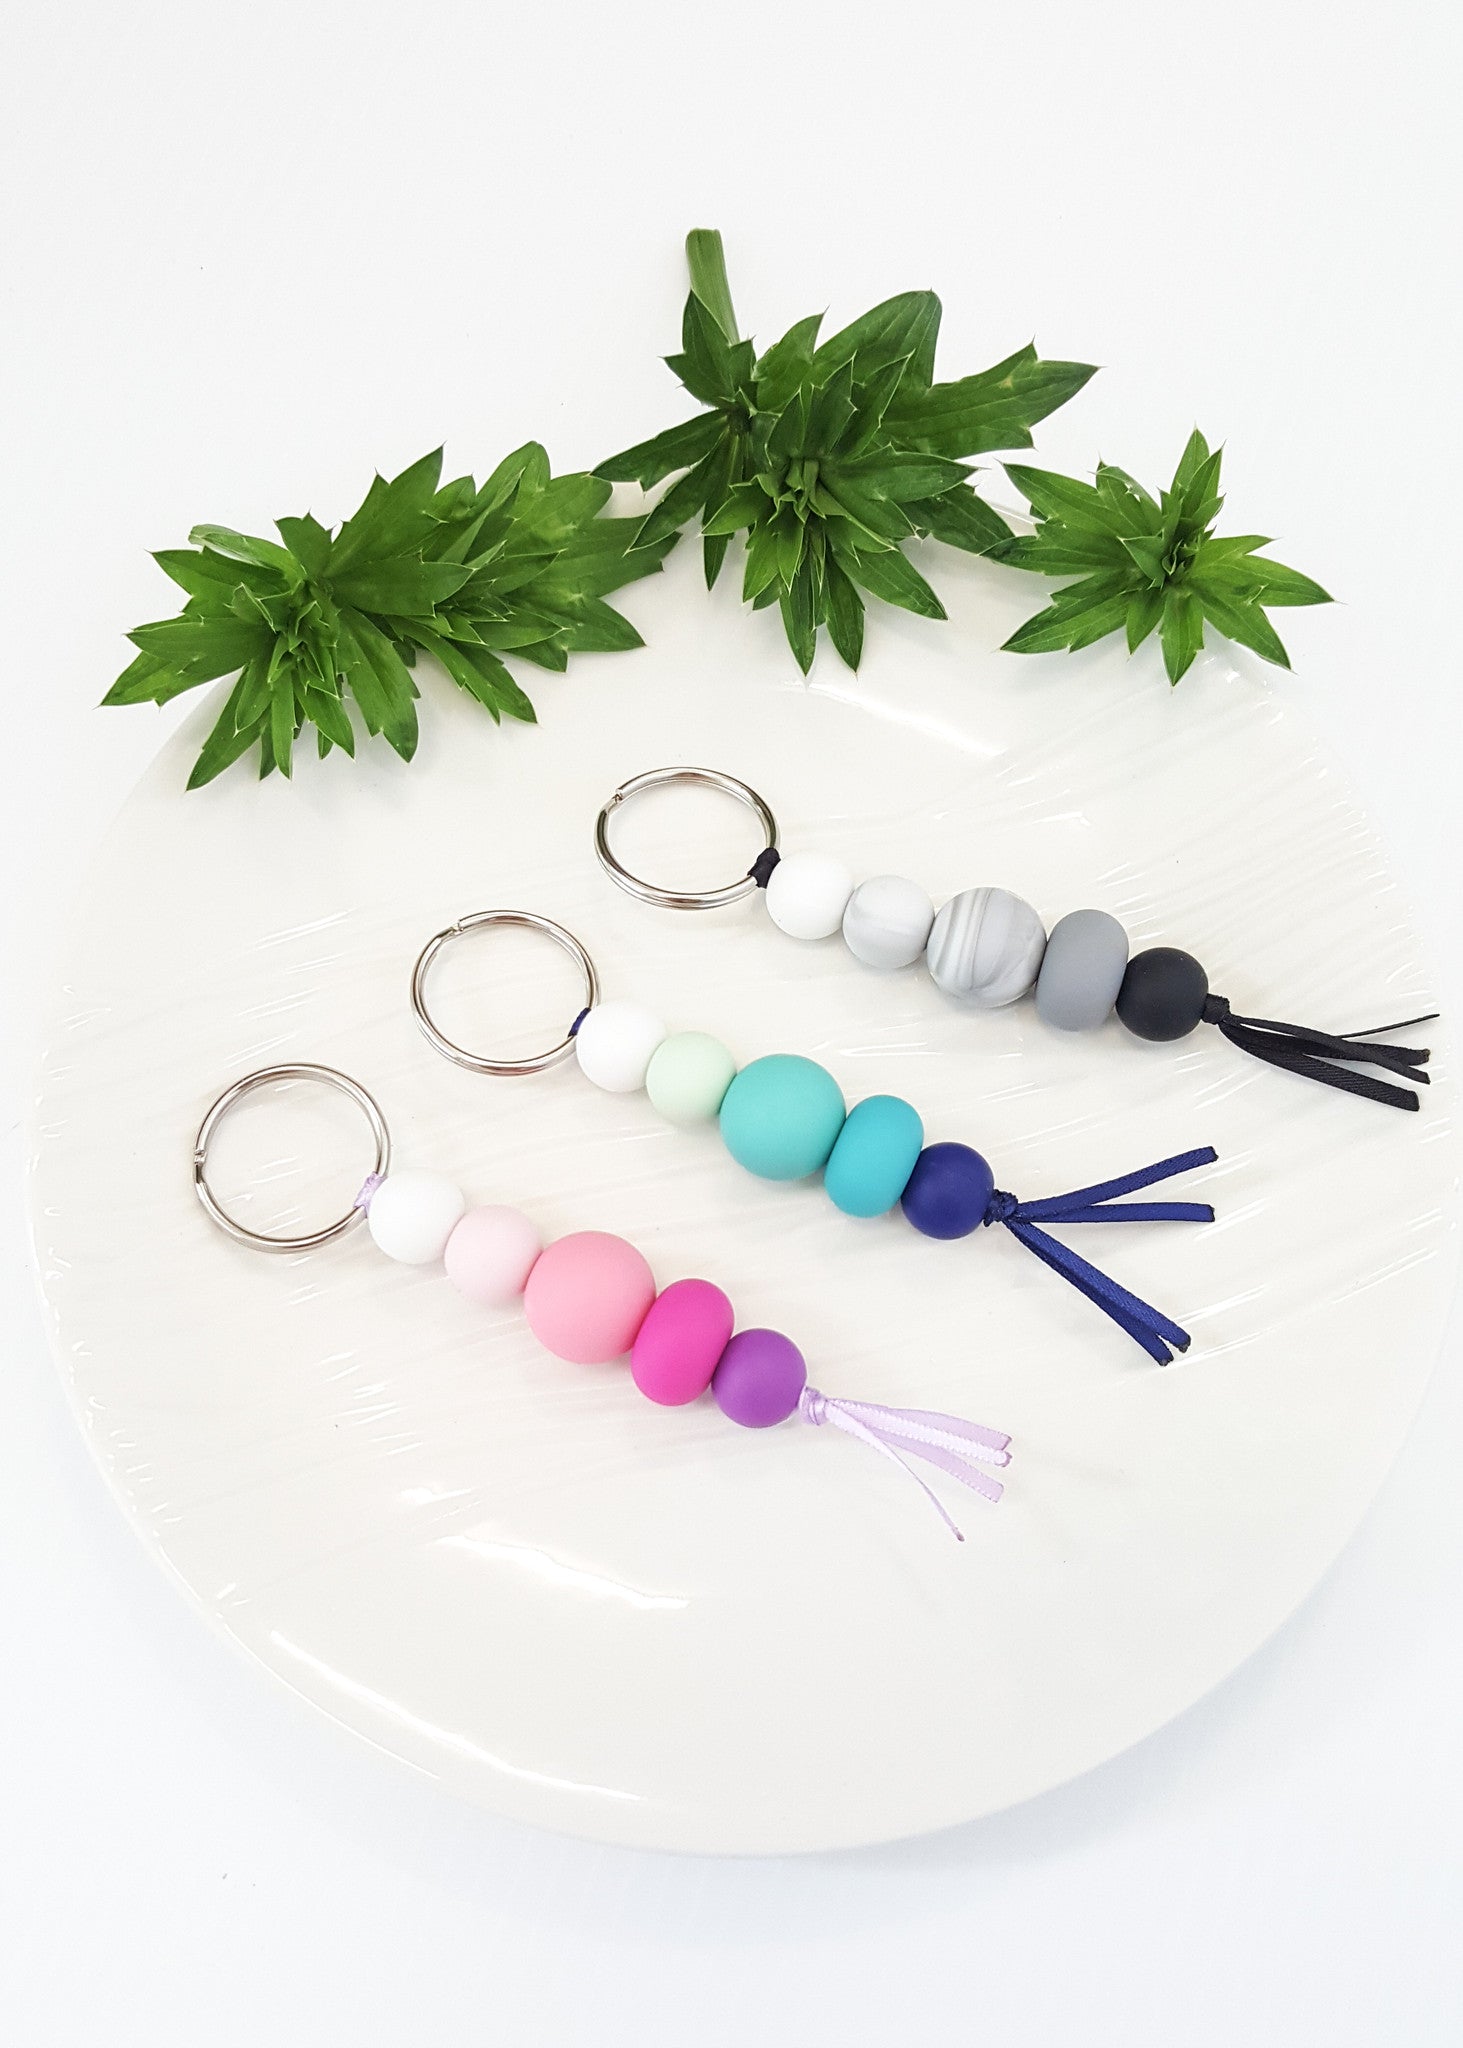 Our Ombre keyrings are soft, bright, lightweight and easy to clean!  The Perfect little accessory to add a pop of colour to your keys or bag! - Ombre Key Ring - Bowerbird Creations